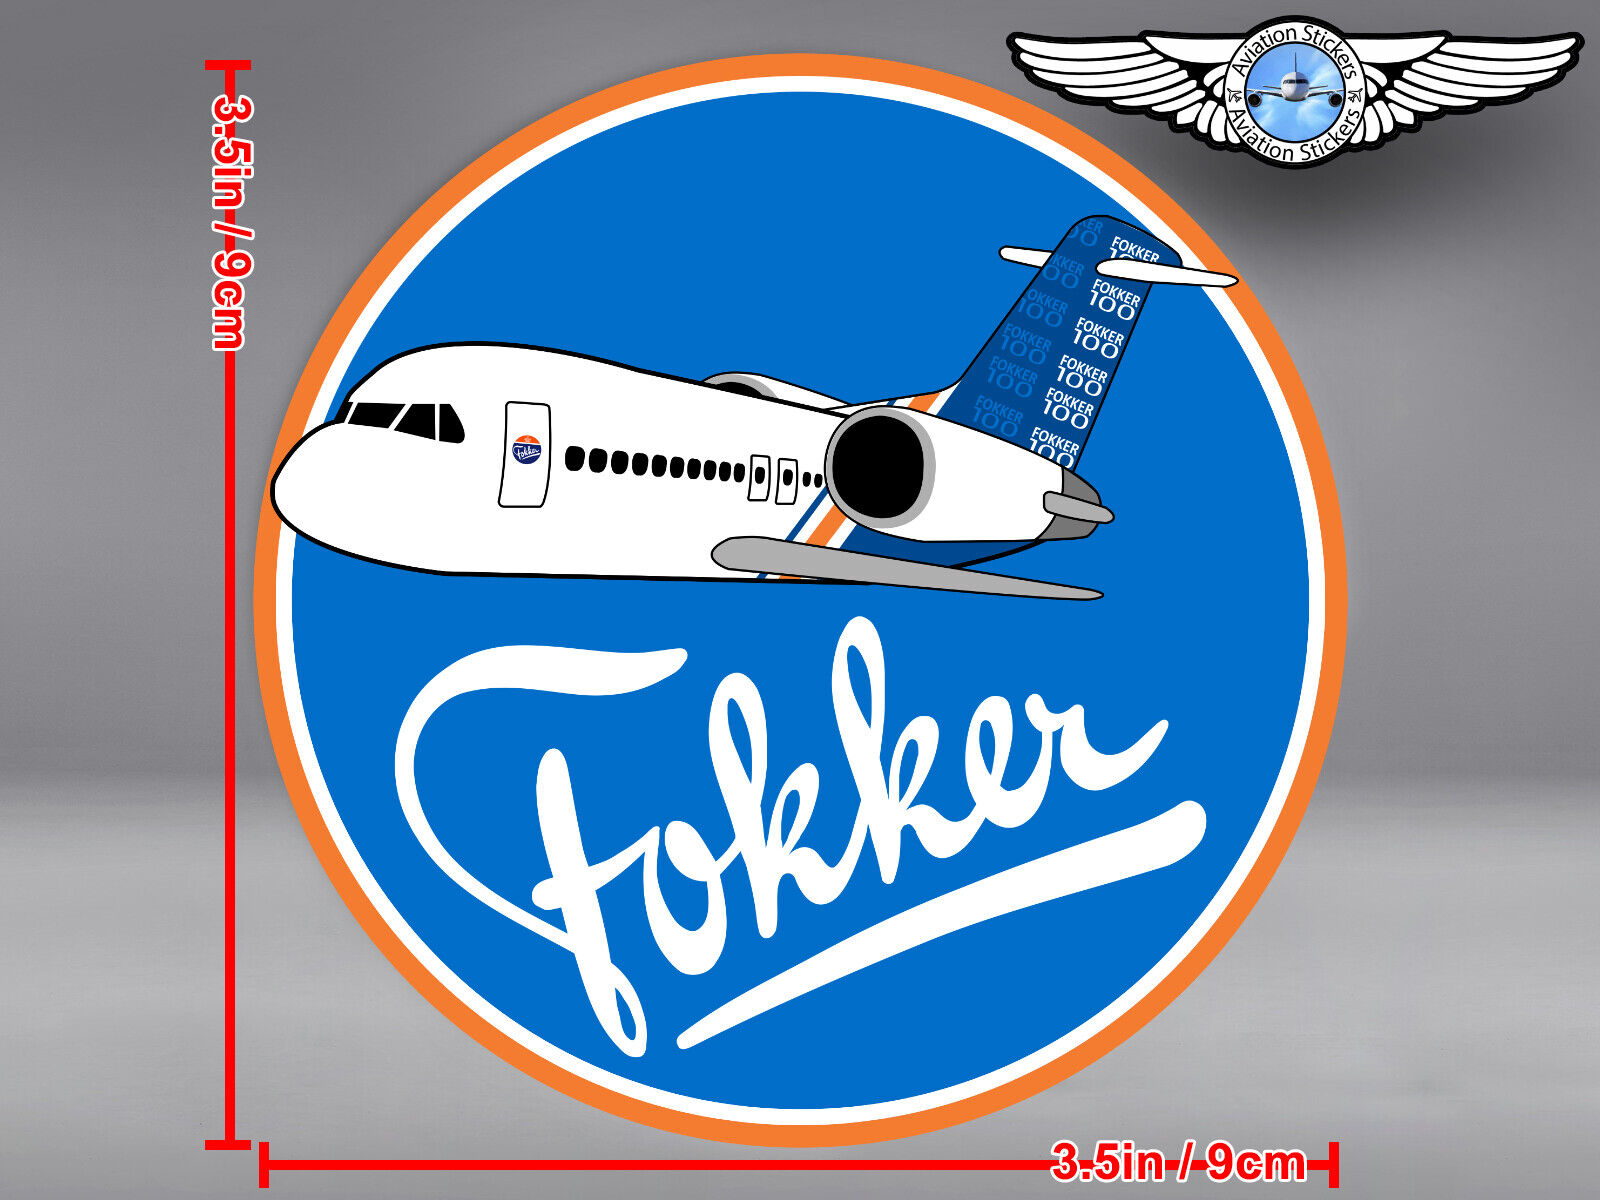 FOKKER 100 F100 HOUSE LIVERY ROUND DECAL / STICKER